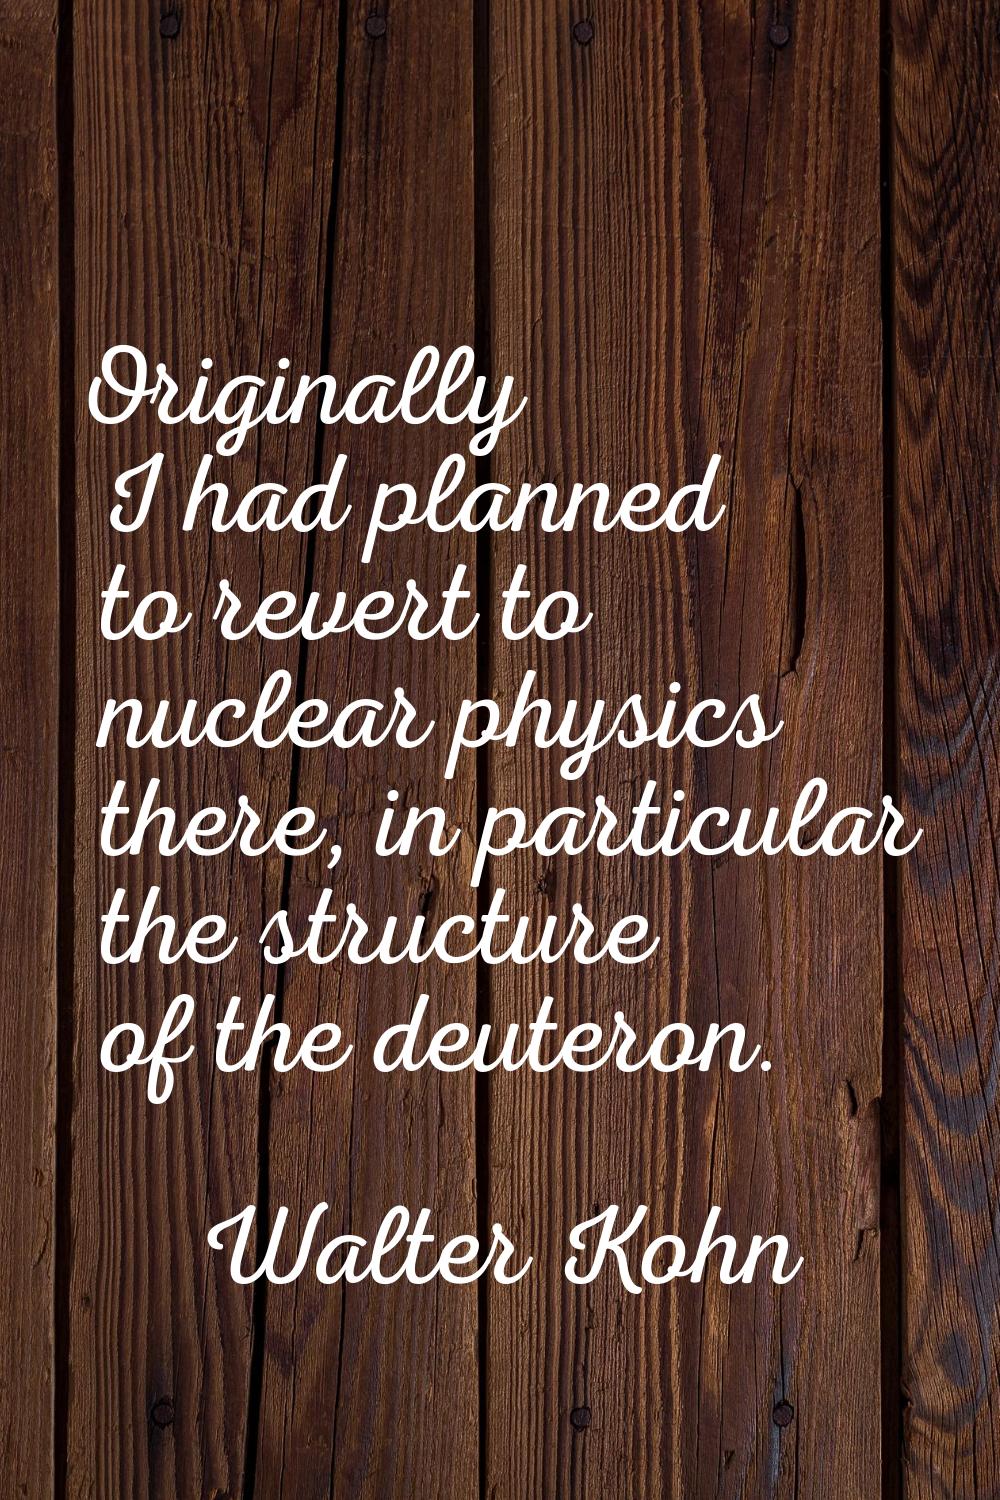 Originally I had planned to revert to nuclear physics there, in particular the structure of the deu